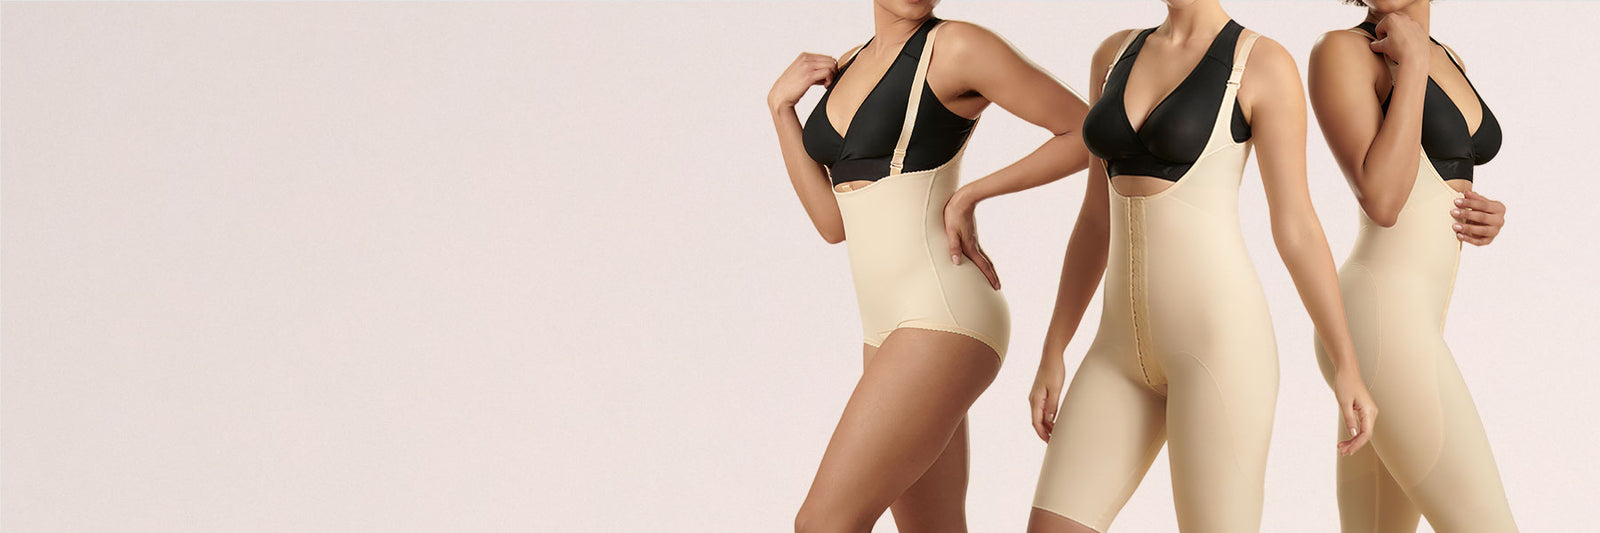 Reinforced Girdle with Panels  Compression Girdle - The Marena Group, LLC